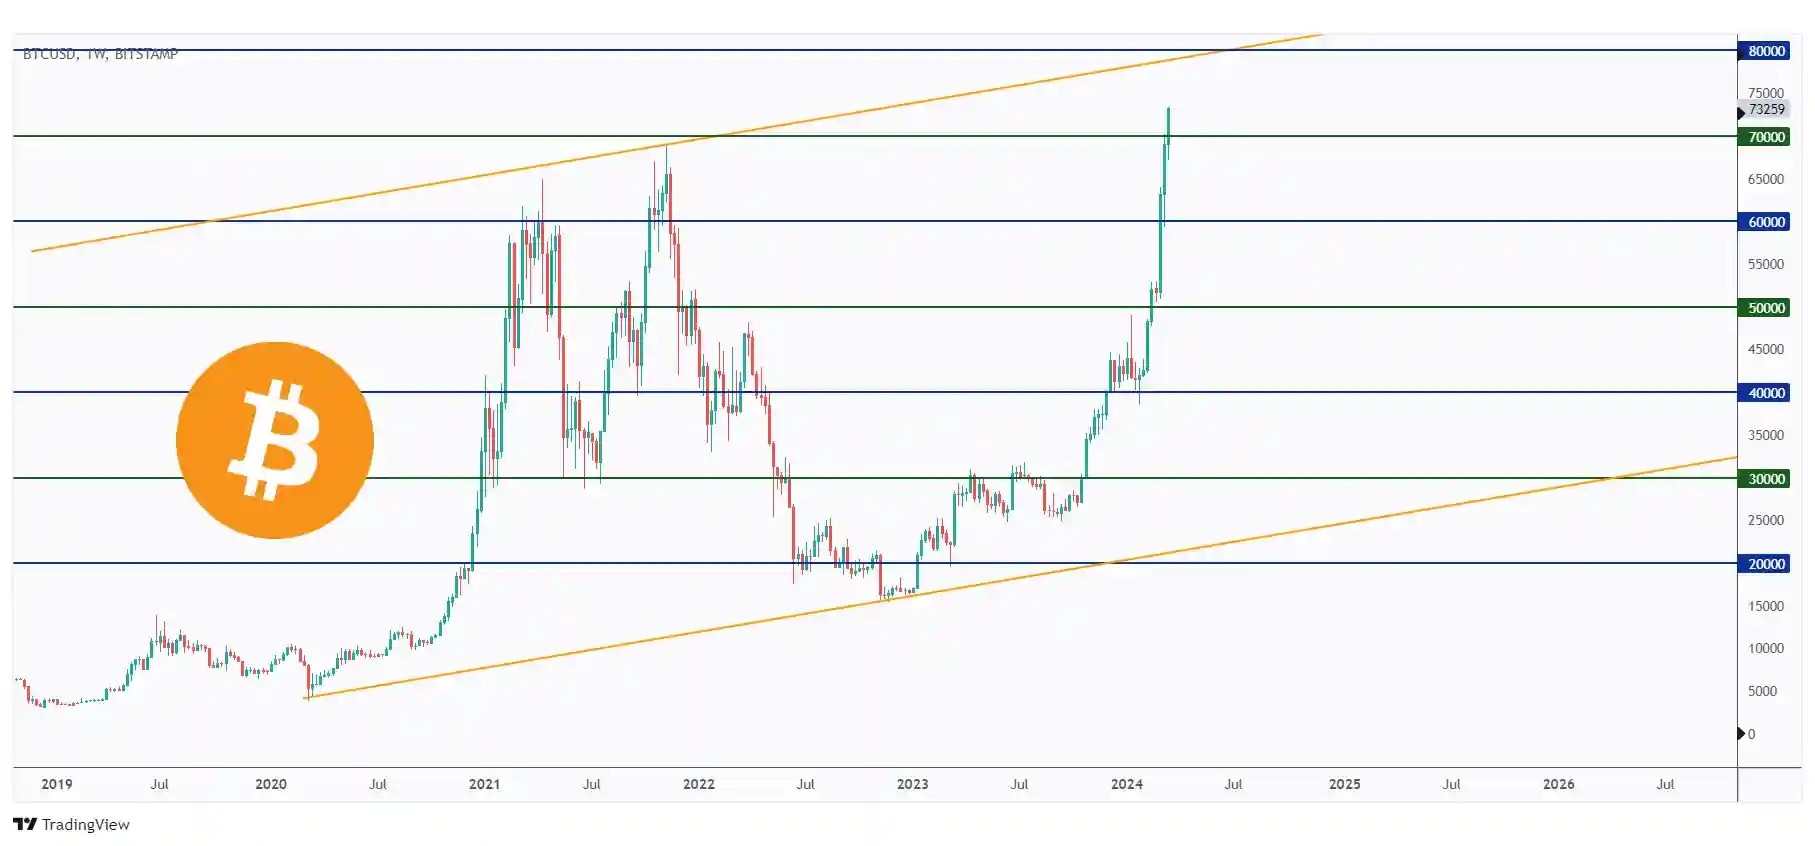 BTC weekly chart showing the overall bullish trend from a macro perspective within the flat channel.